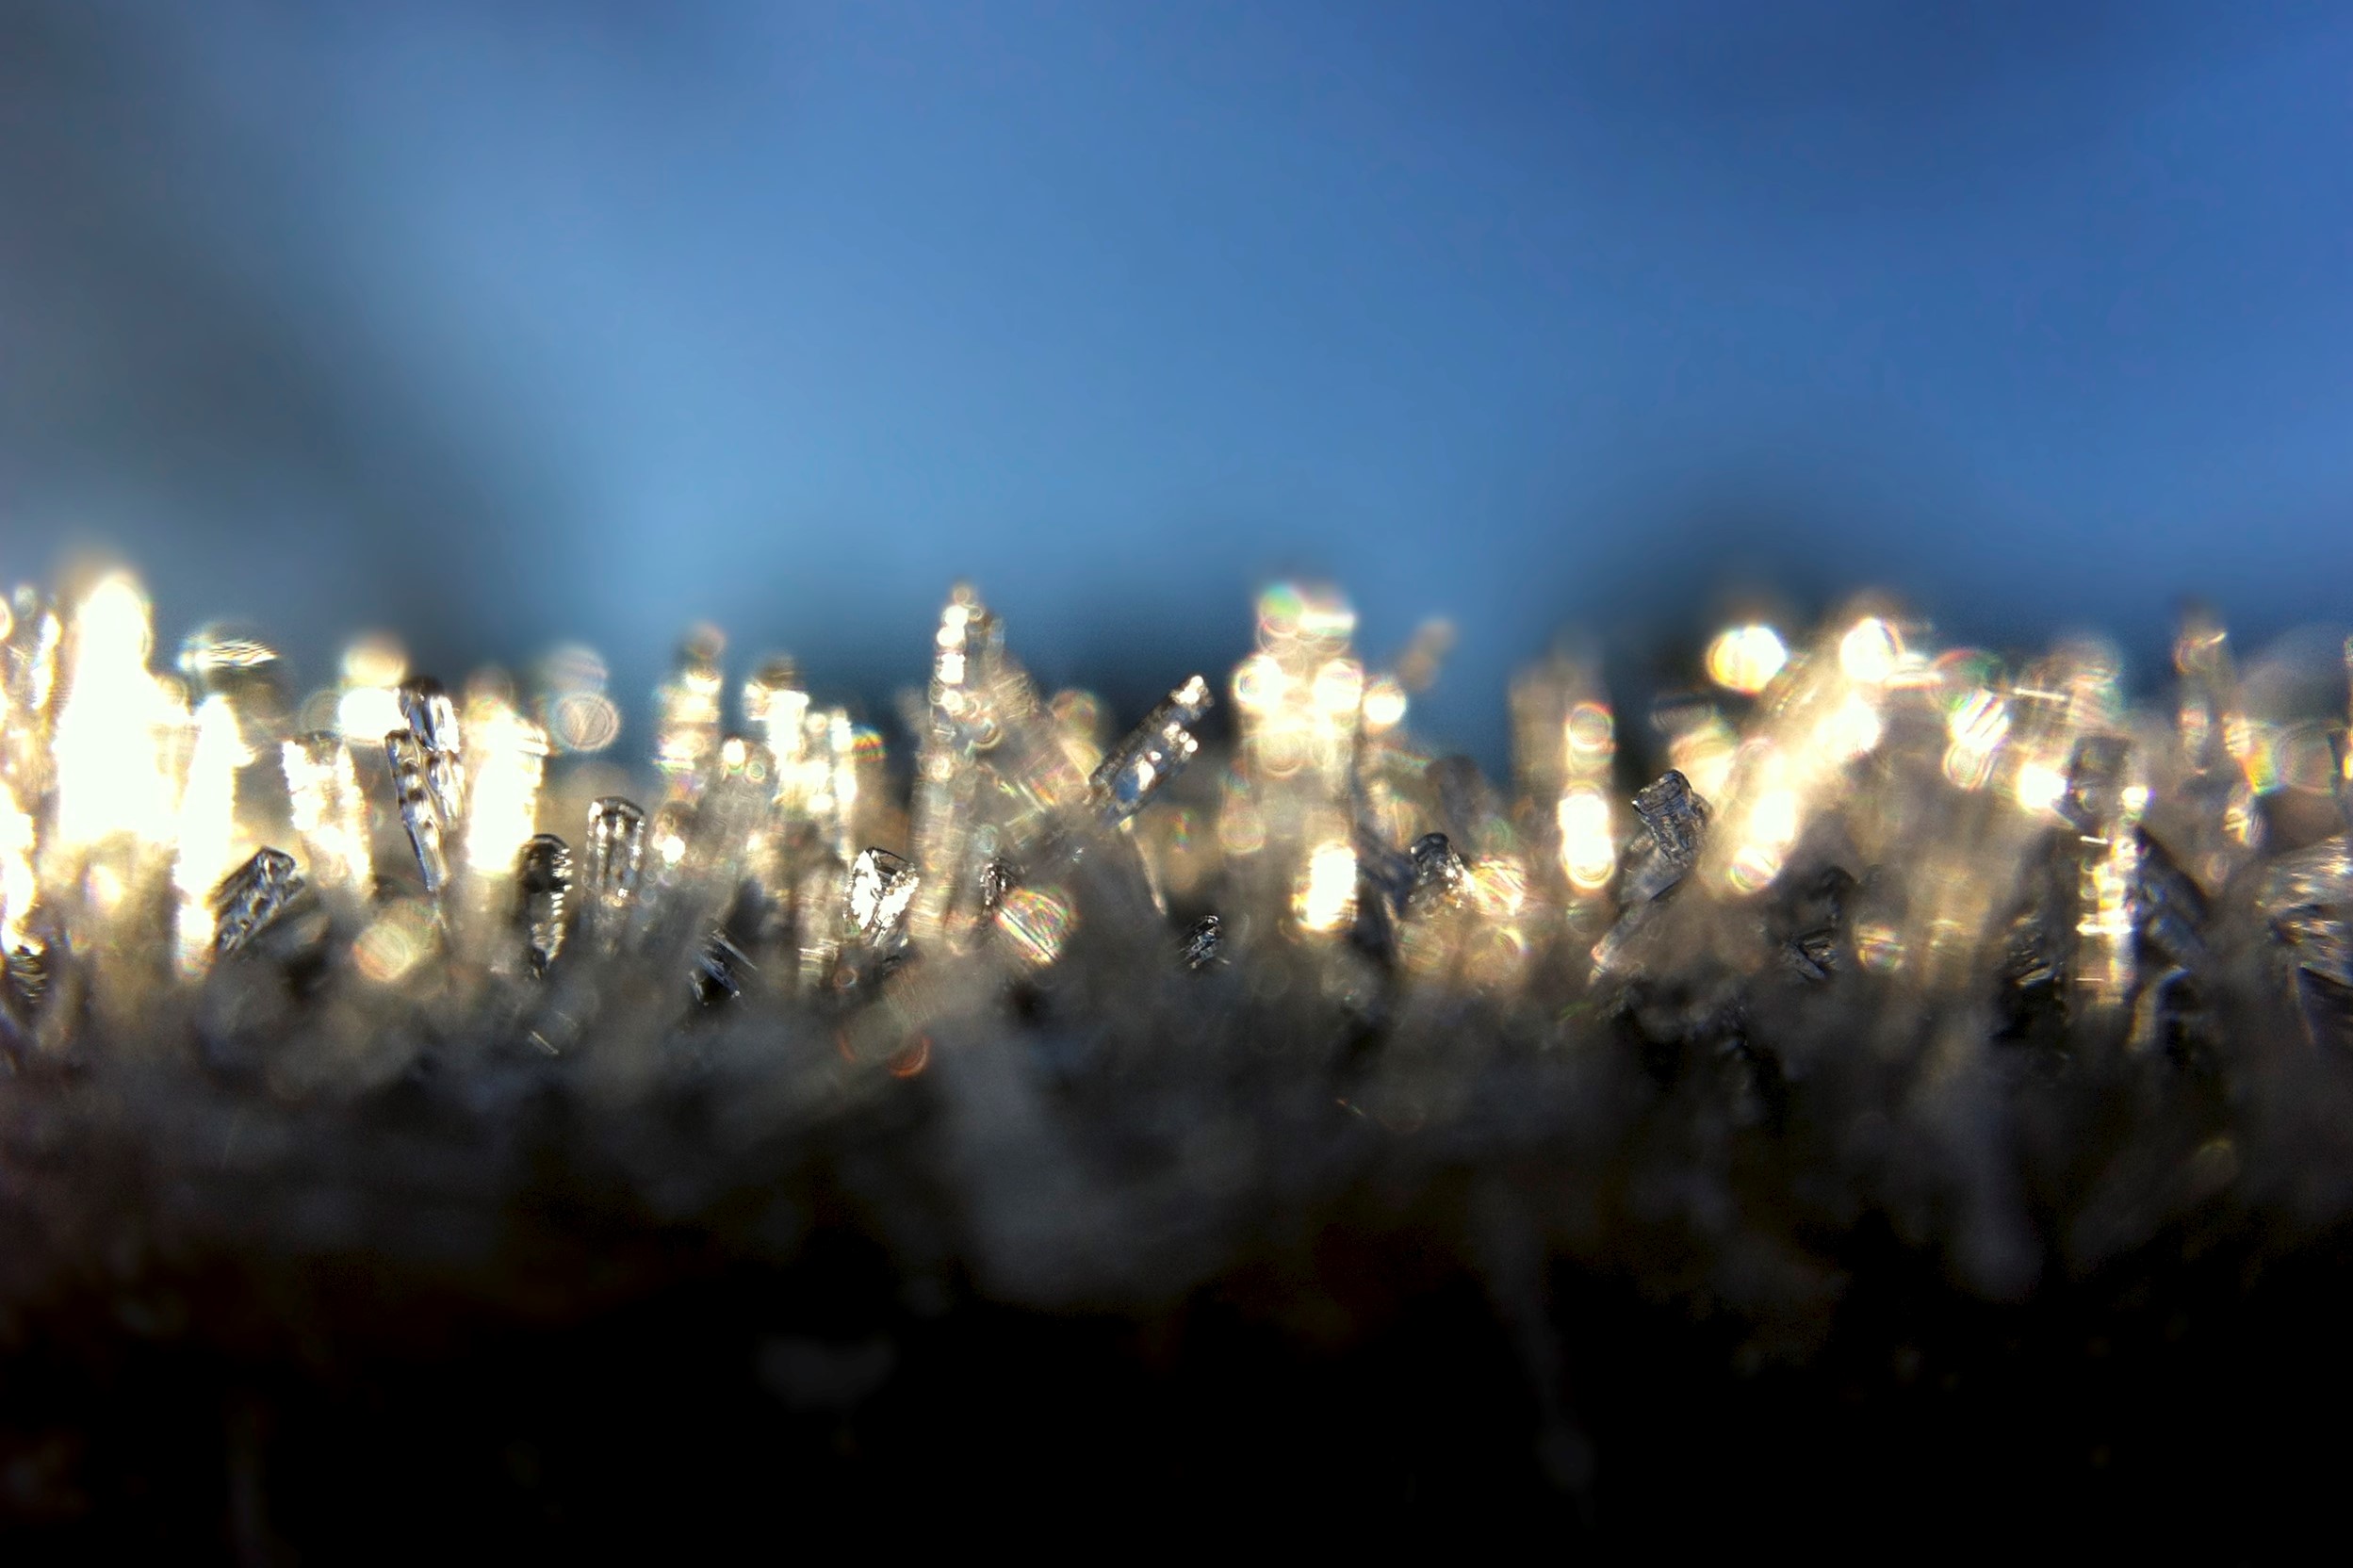 image of ice crystals